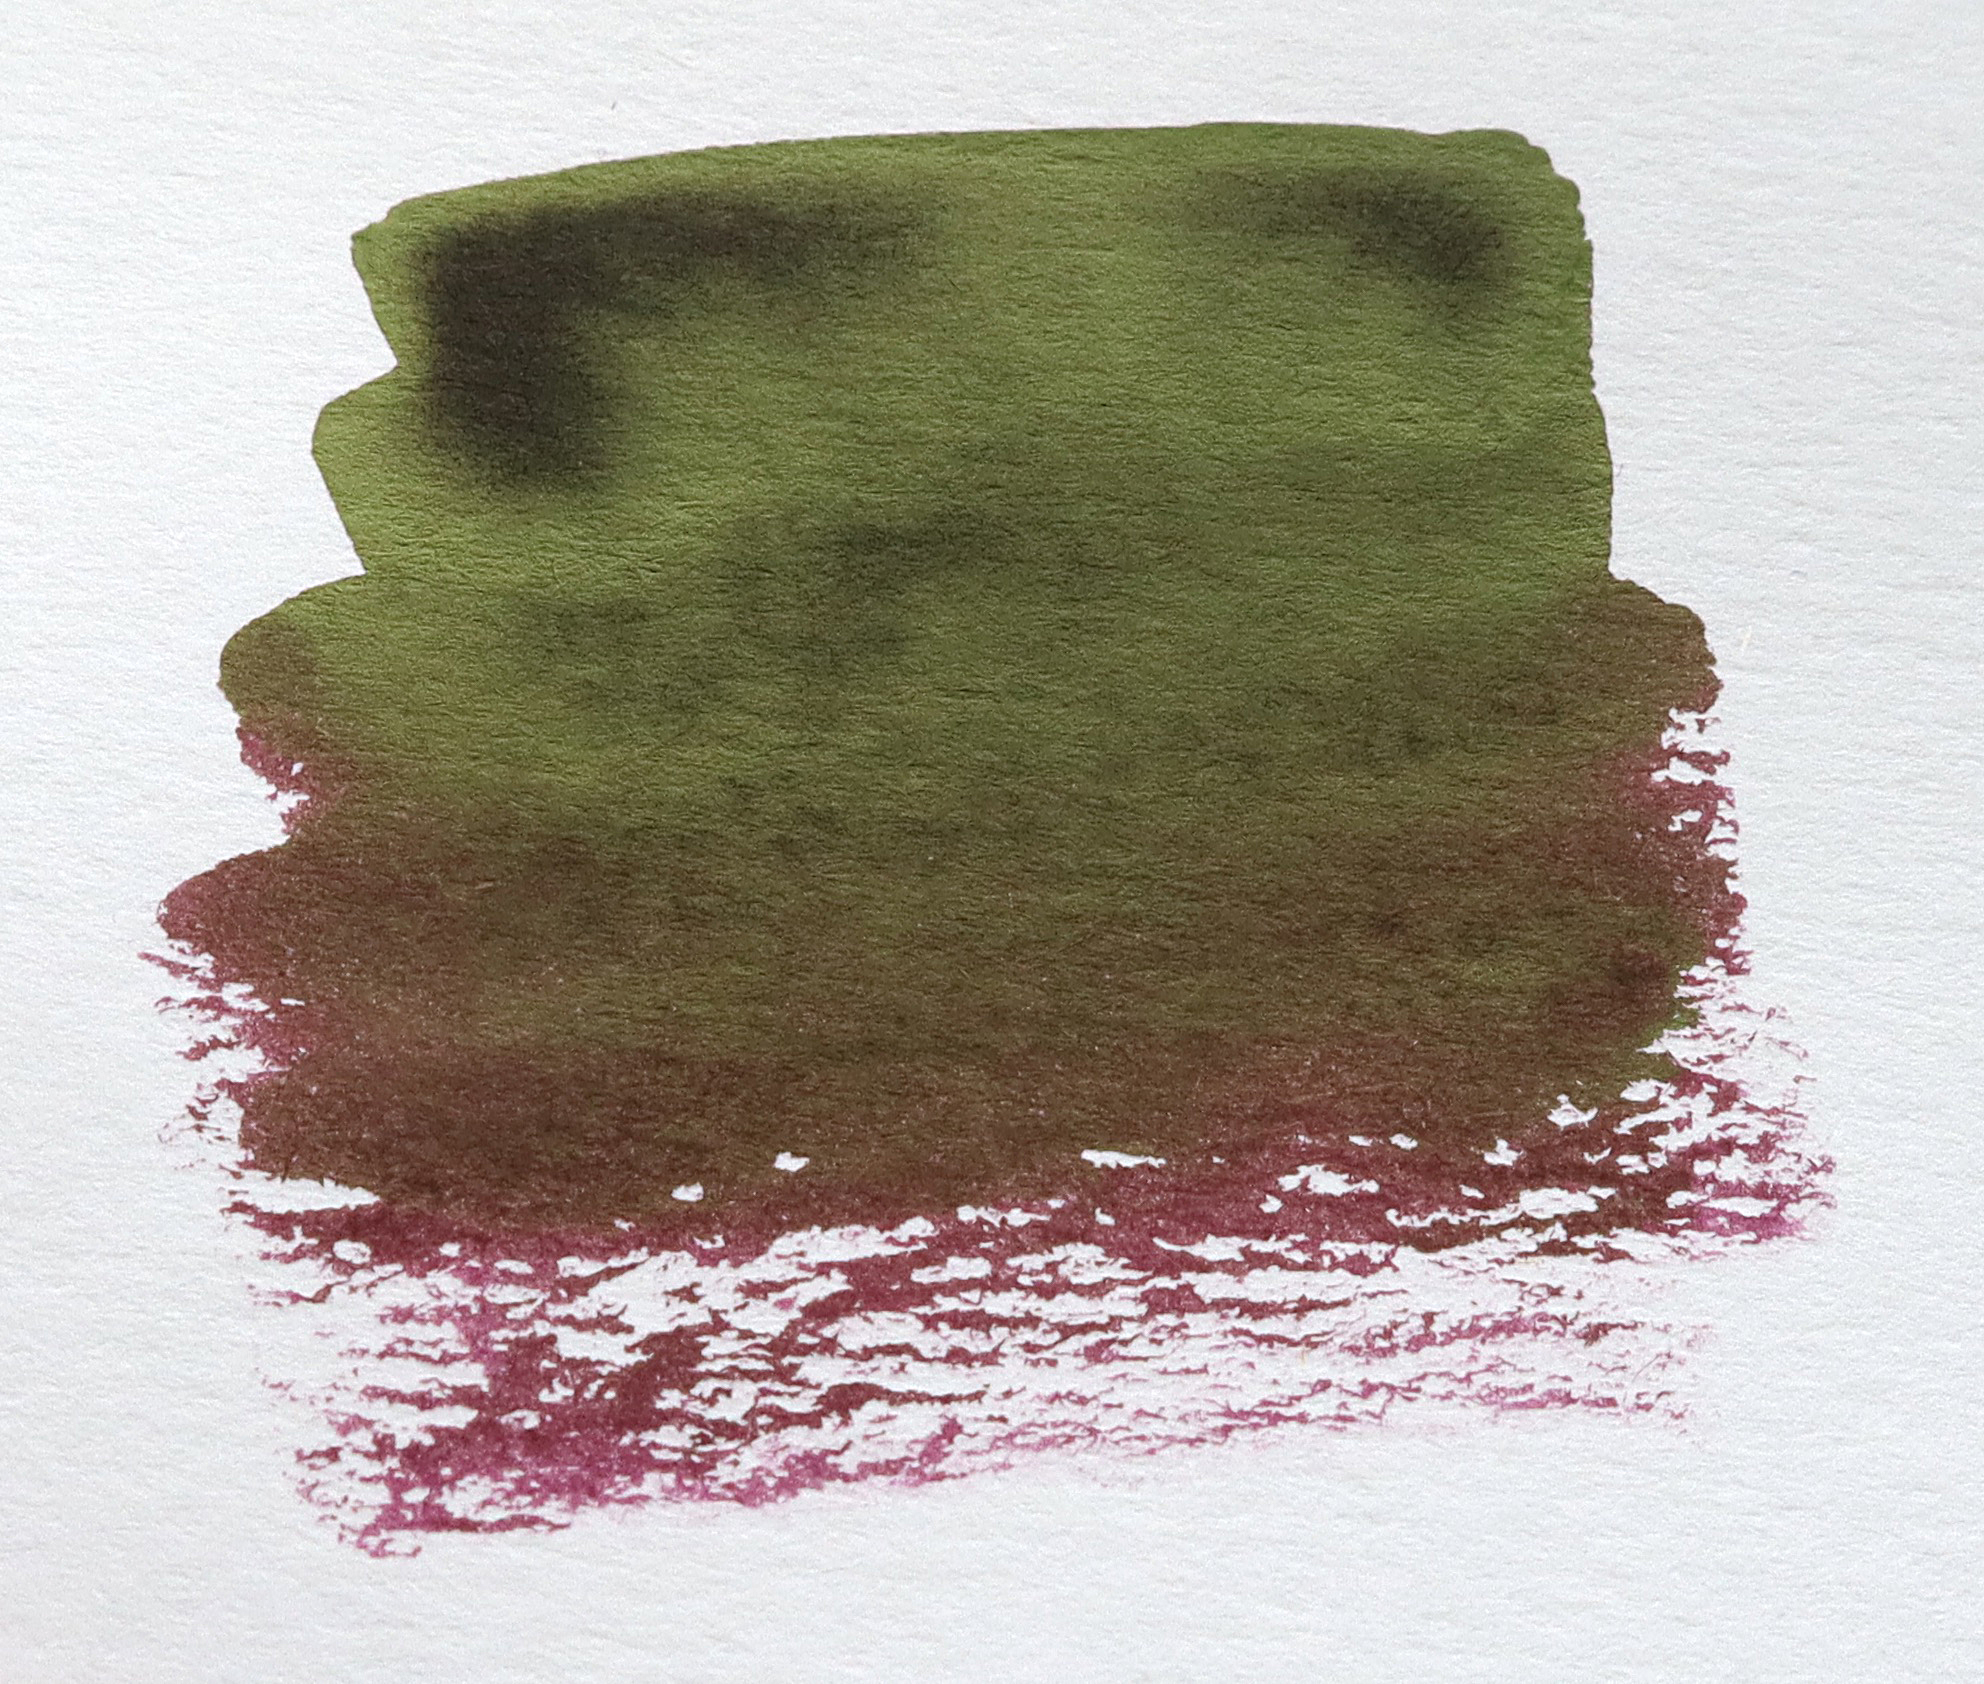 Diamine Master of Puppets Ink Sample 2ml  